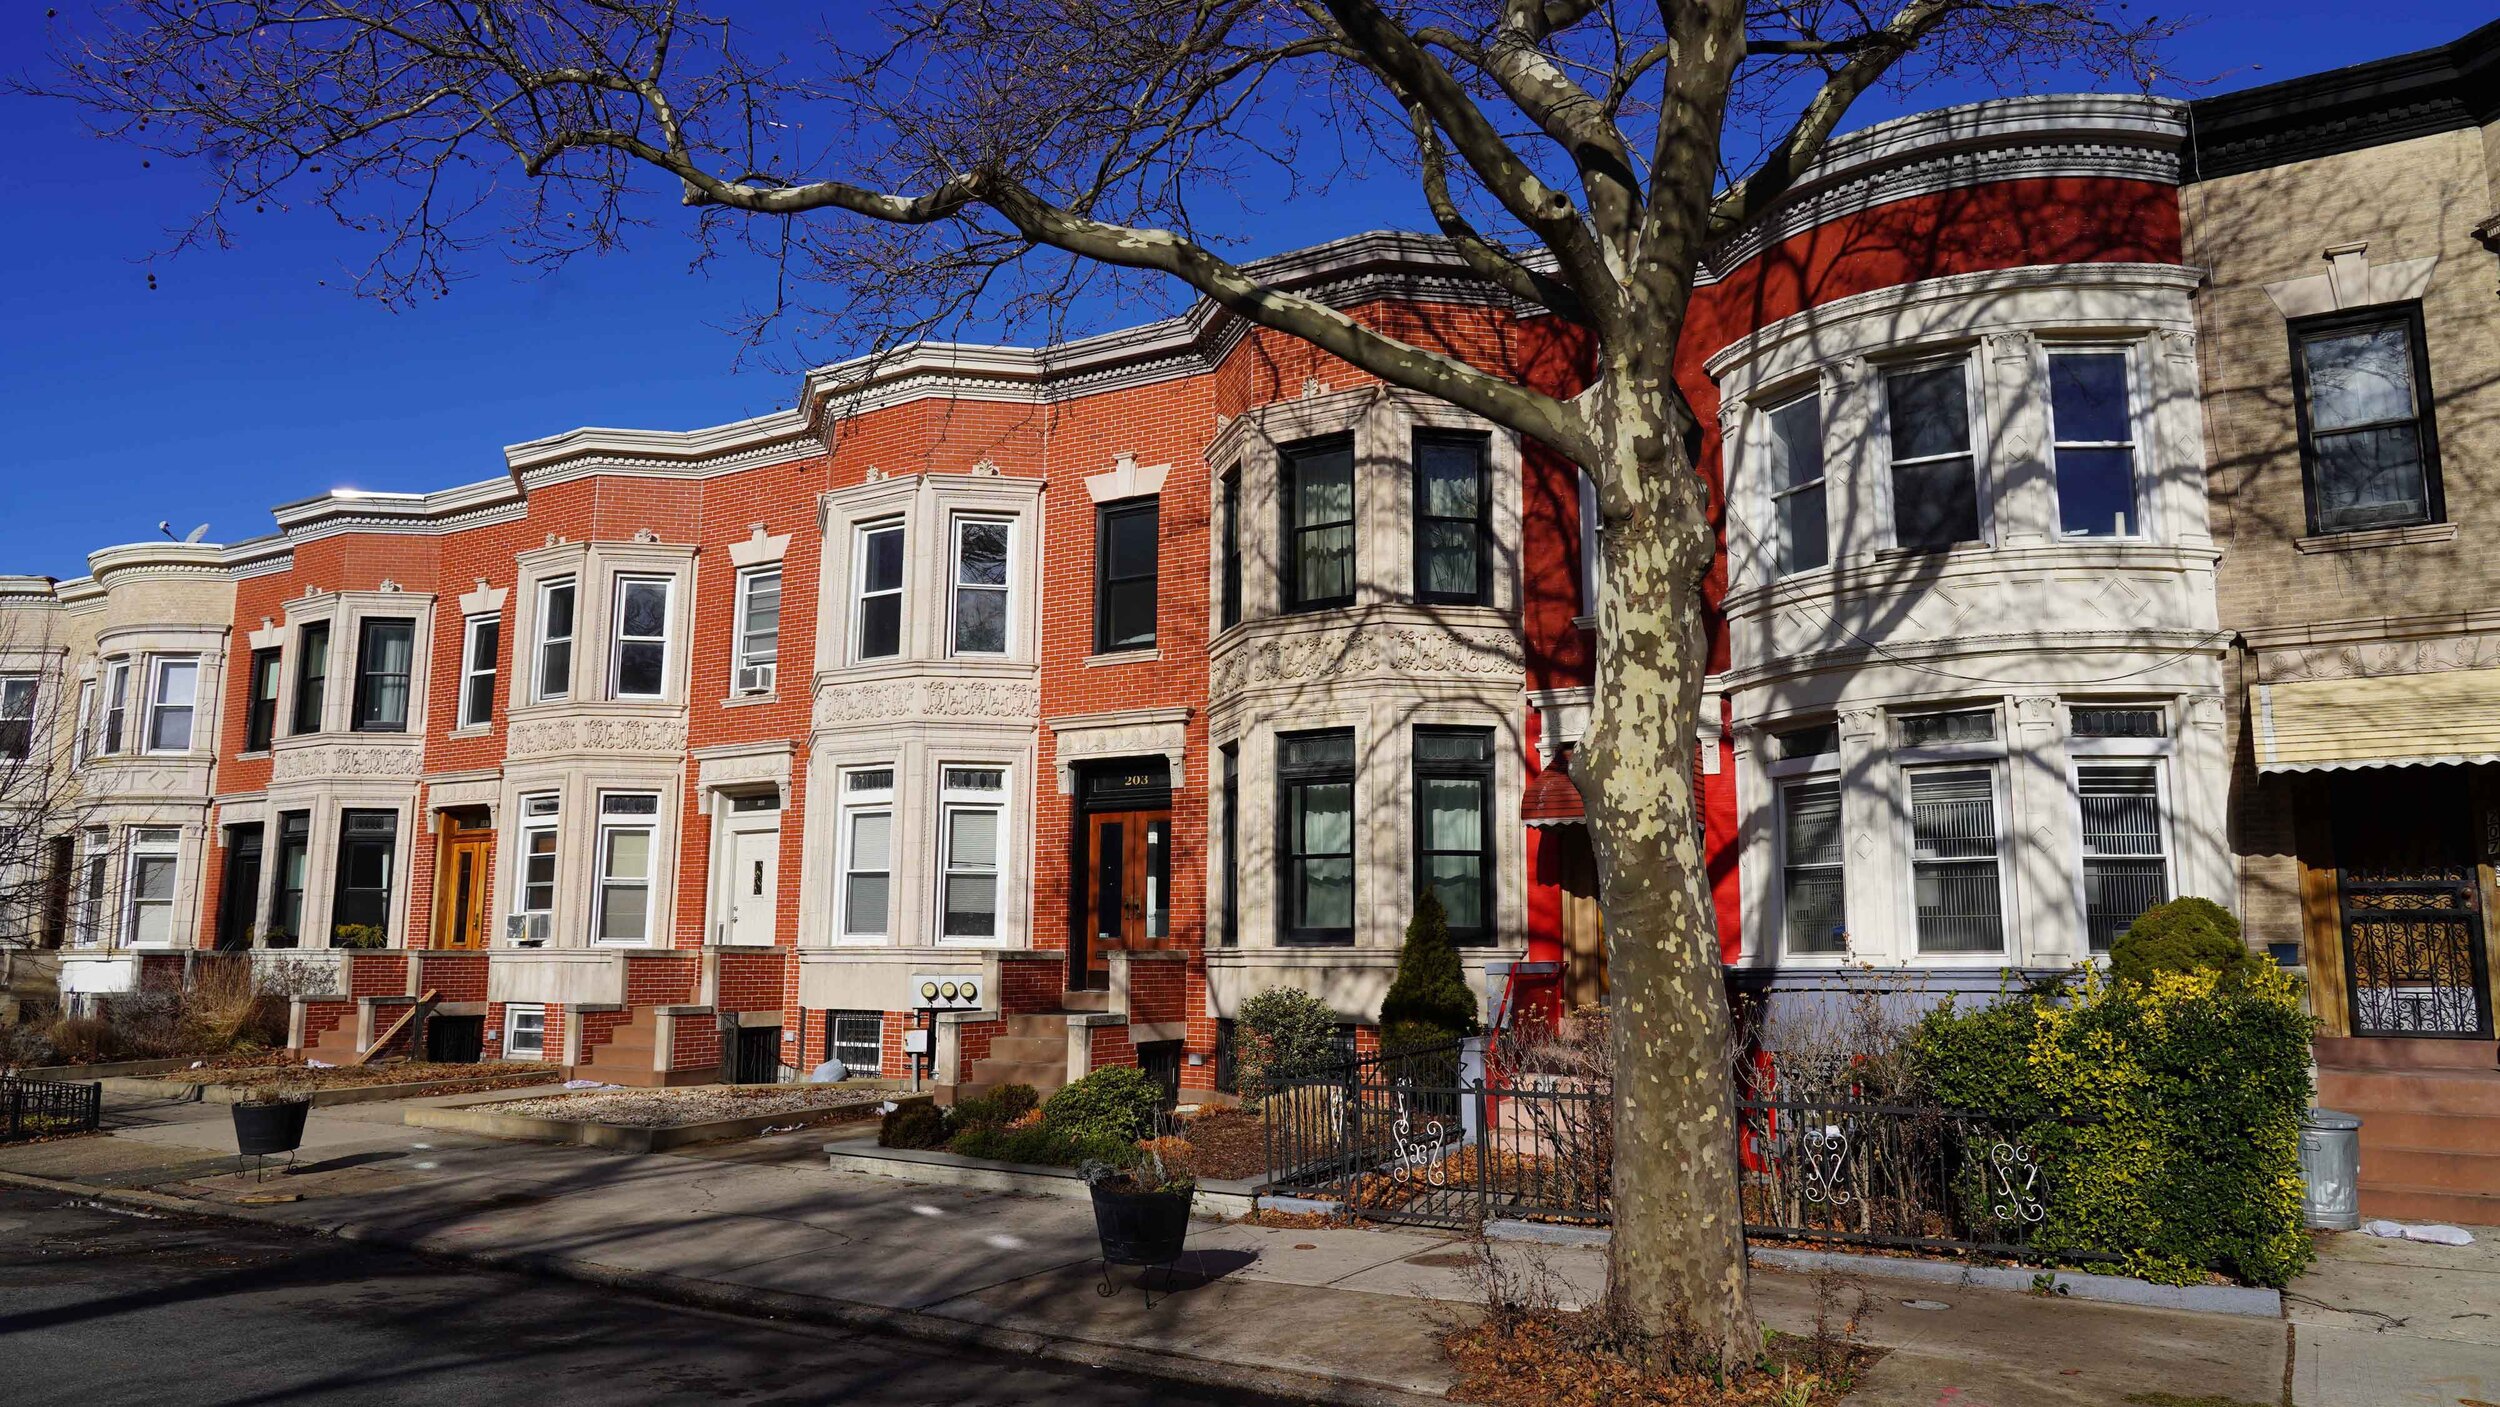 Kings County, Prospect Lefferts Gardens Heritage Council, Inc. – Prospect Lefferts Gardens Neighborhood, Cultural Resource Survey